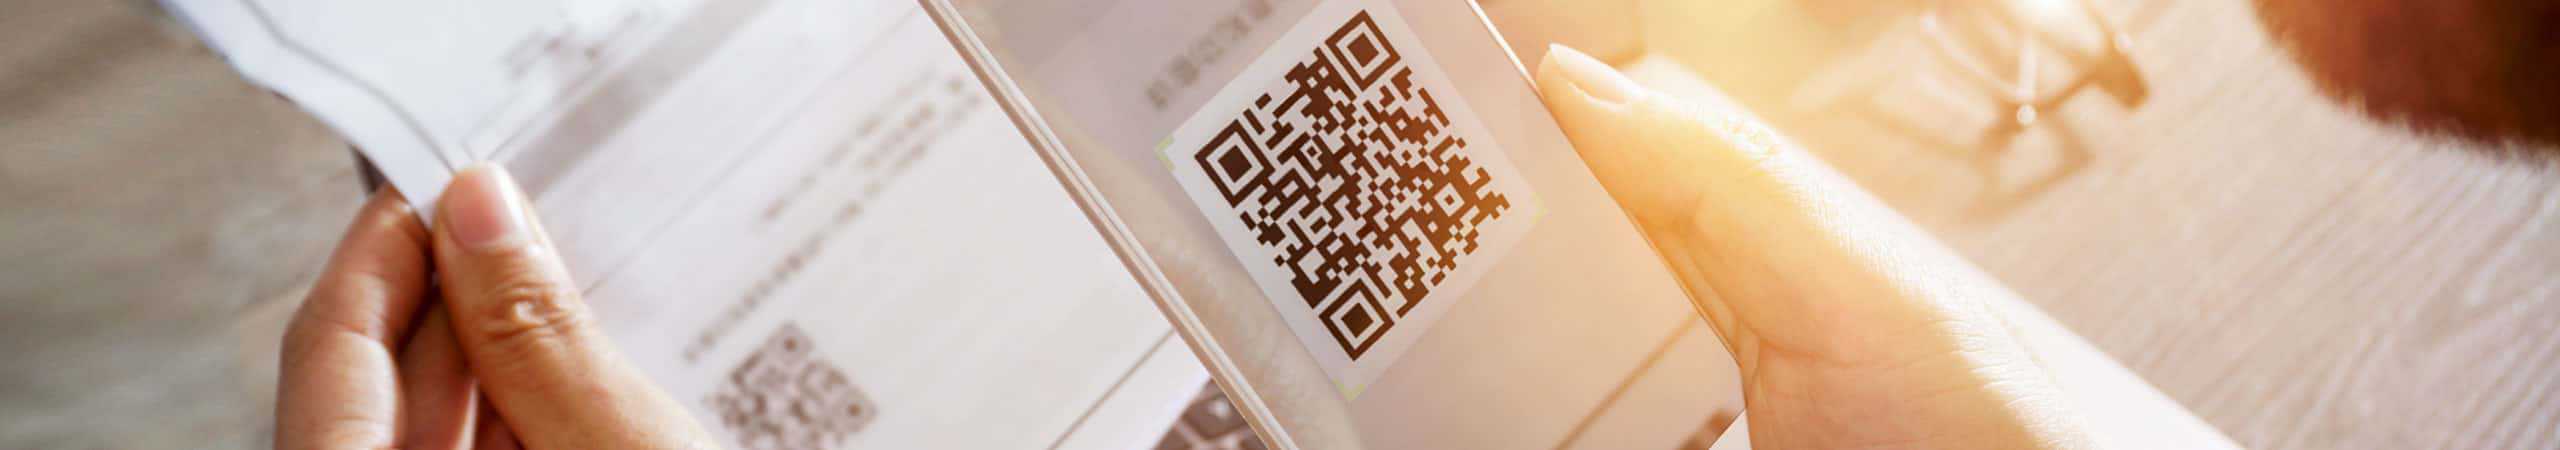 This is a homemade, invalid qr code.